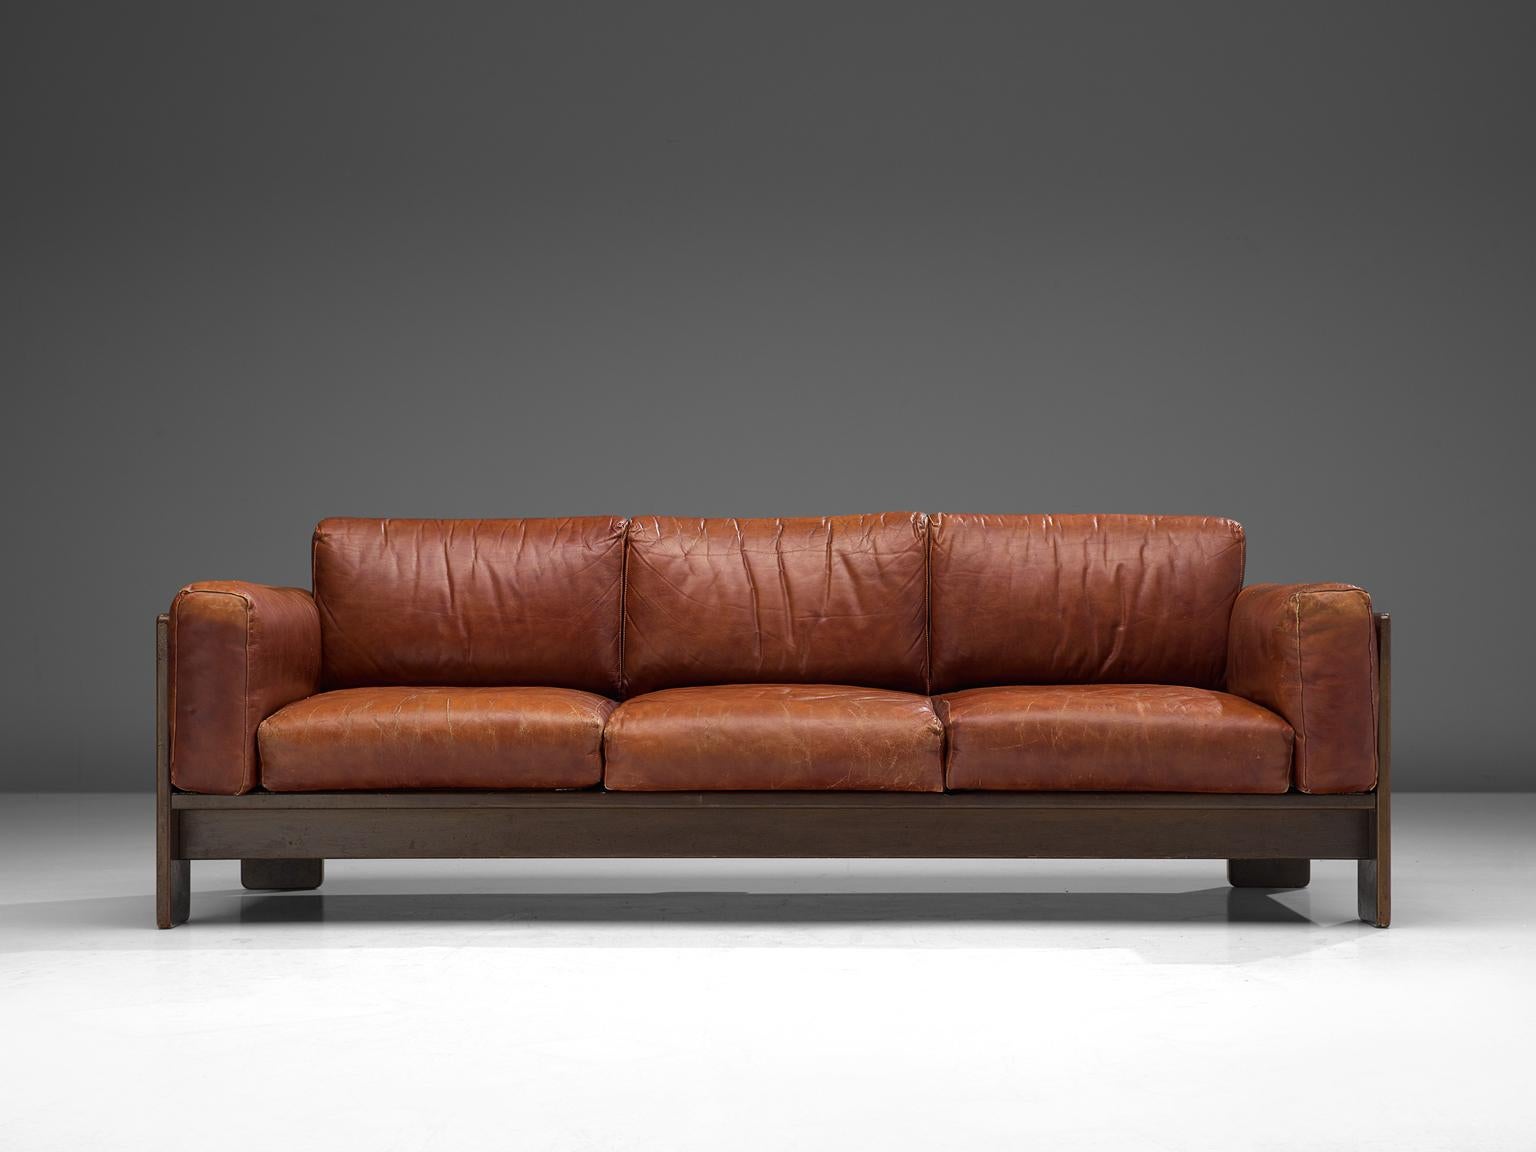 Tobia Scarpa for Knoll, 'Bastiano' sofa, leather and walnut, Italy, design 1960, manufactured between 1969-1970s.

Beautiful Bastiano sofa made with a walnut frame and dark cognac leather cushions. Tobia Scarpa designed the Bastiano series for the